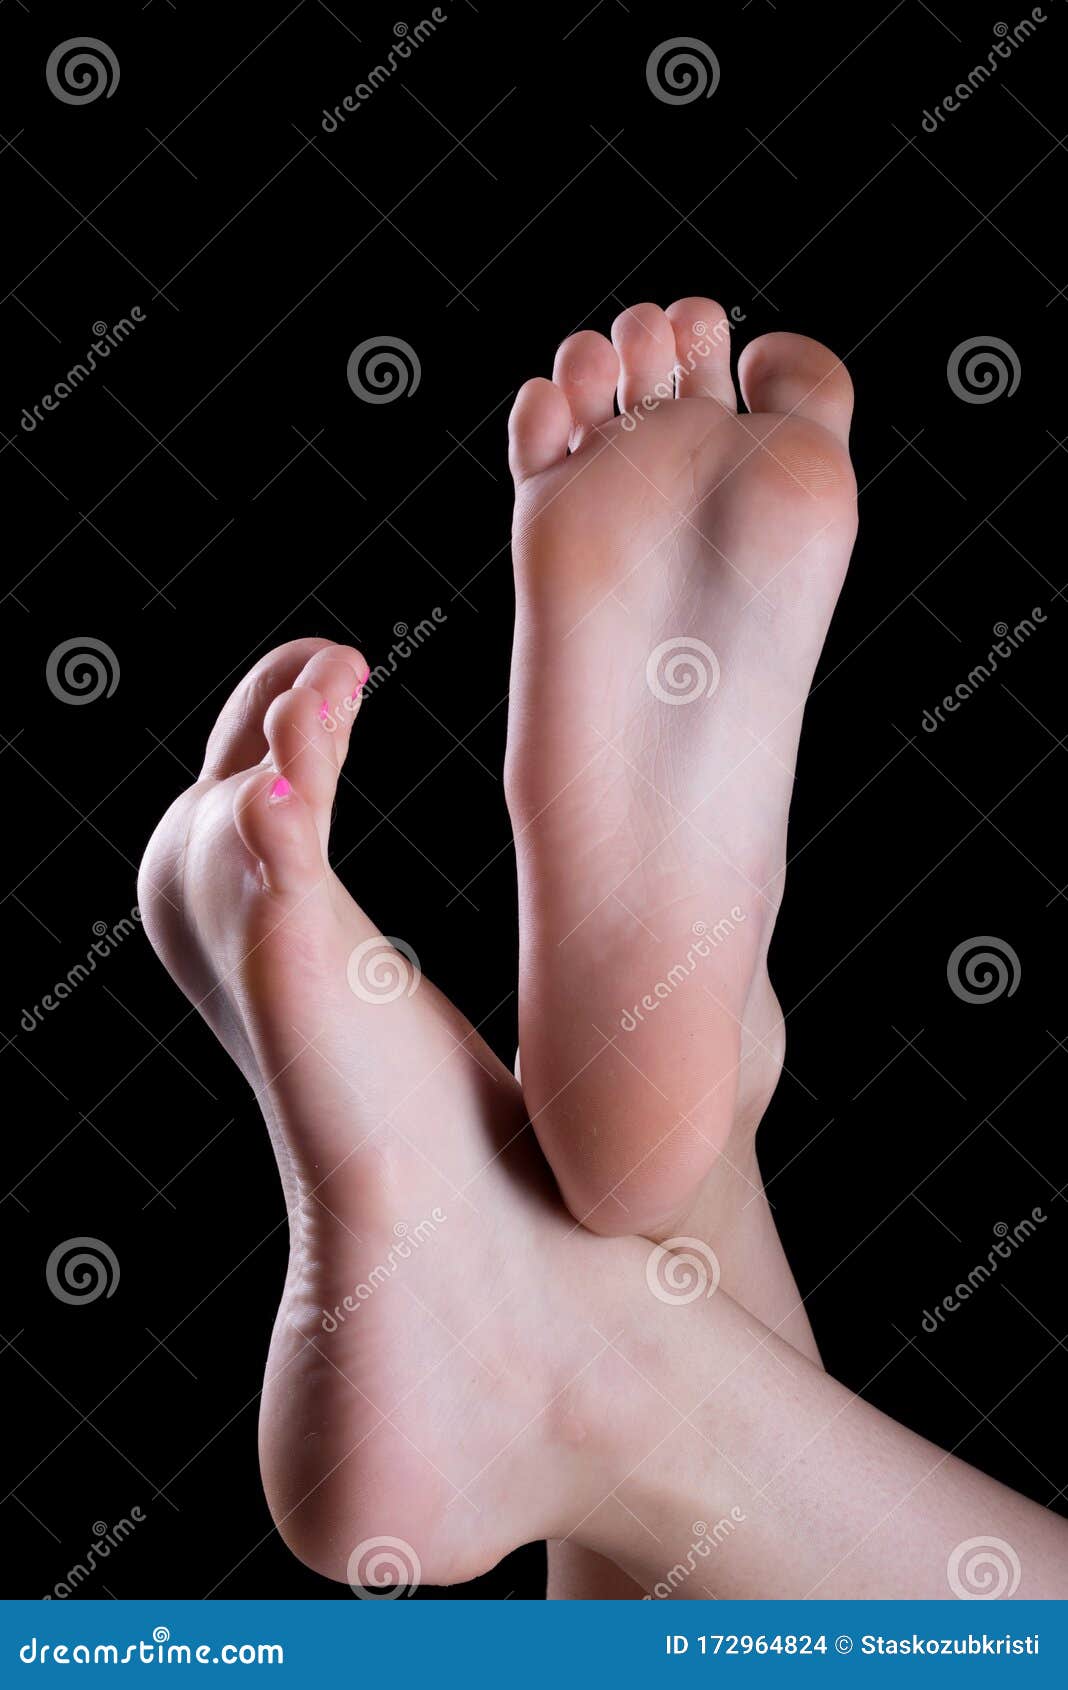 barefoot sole